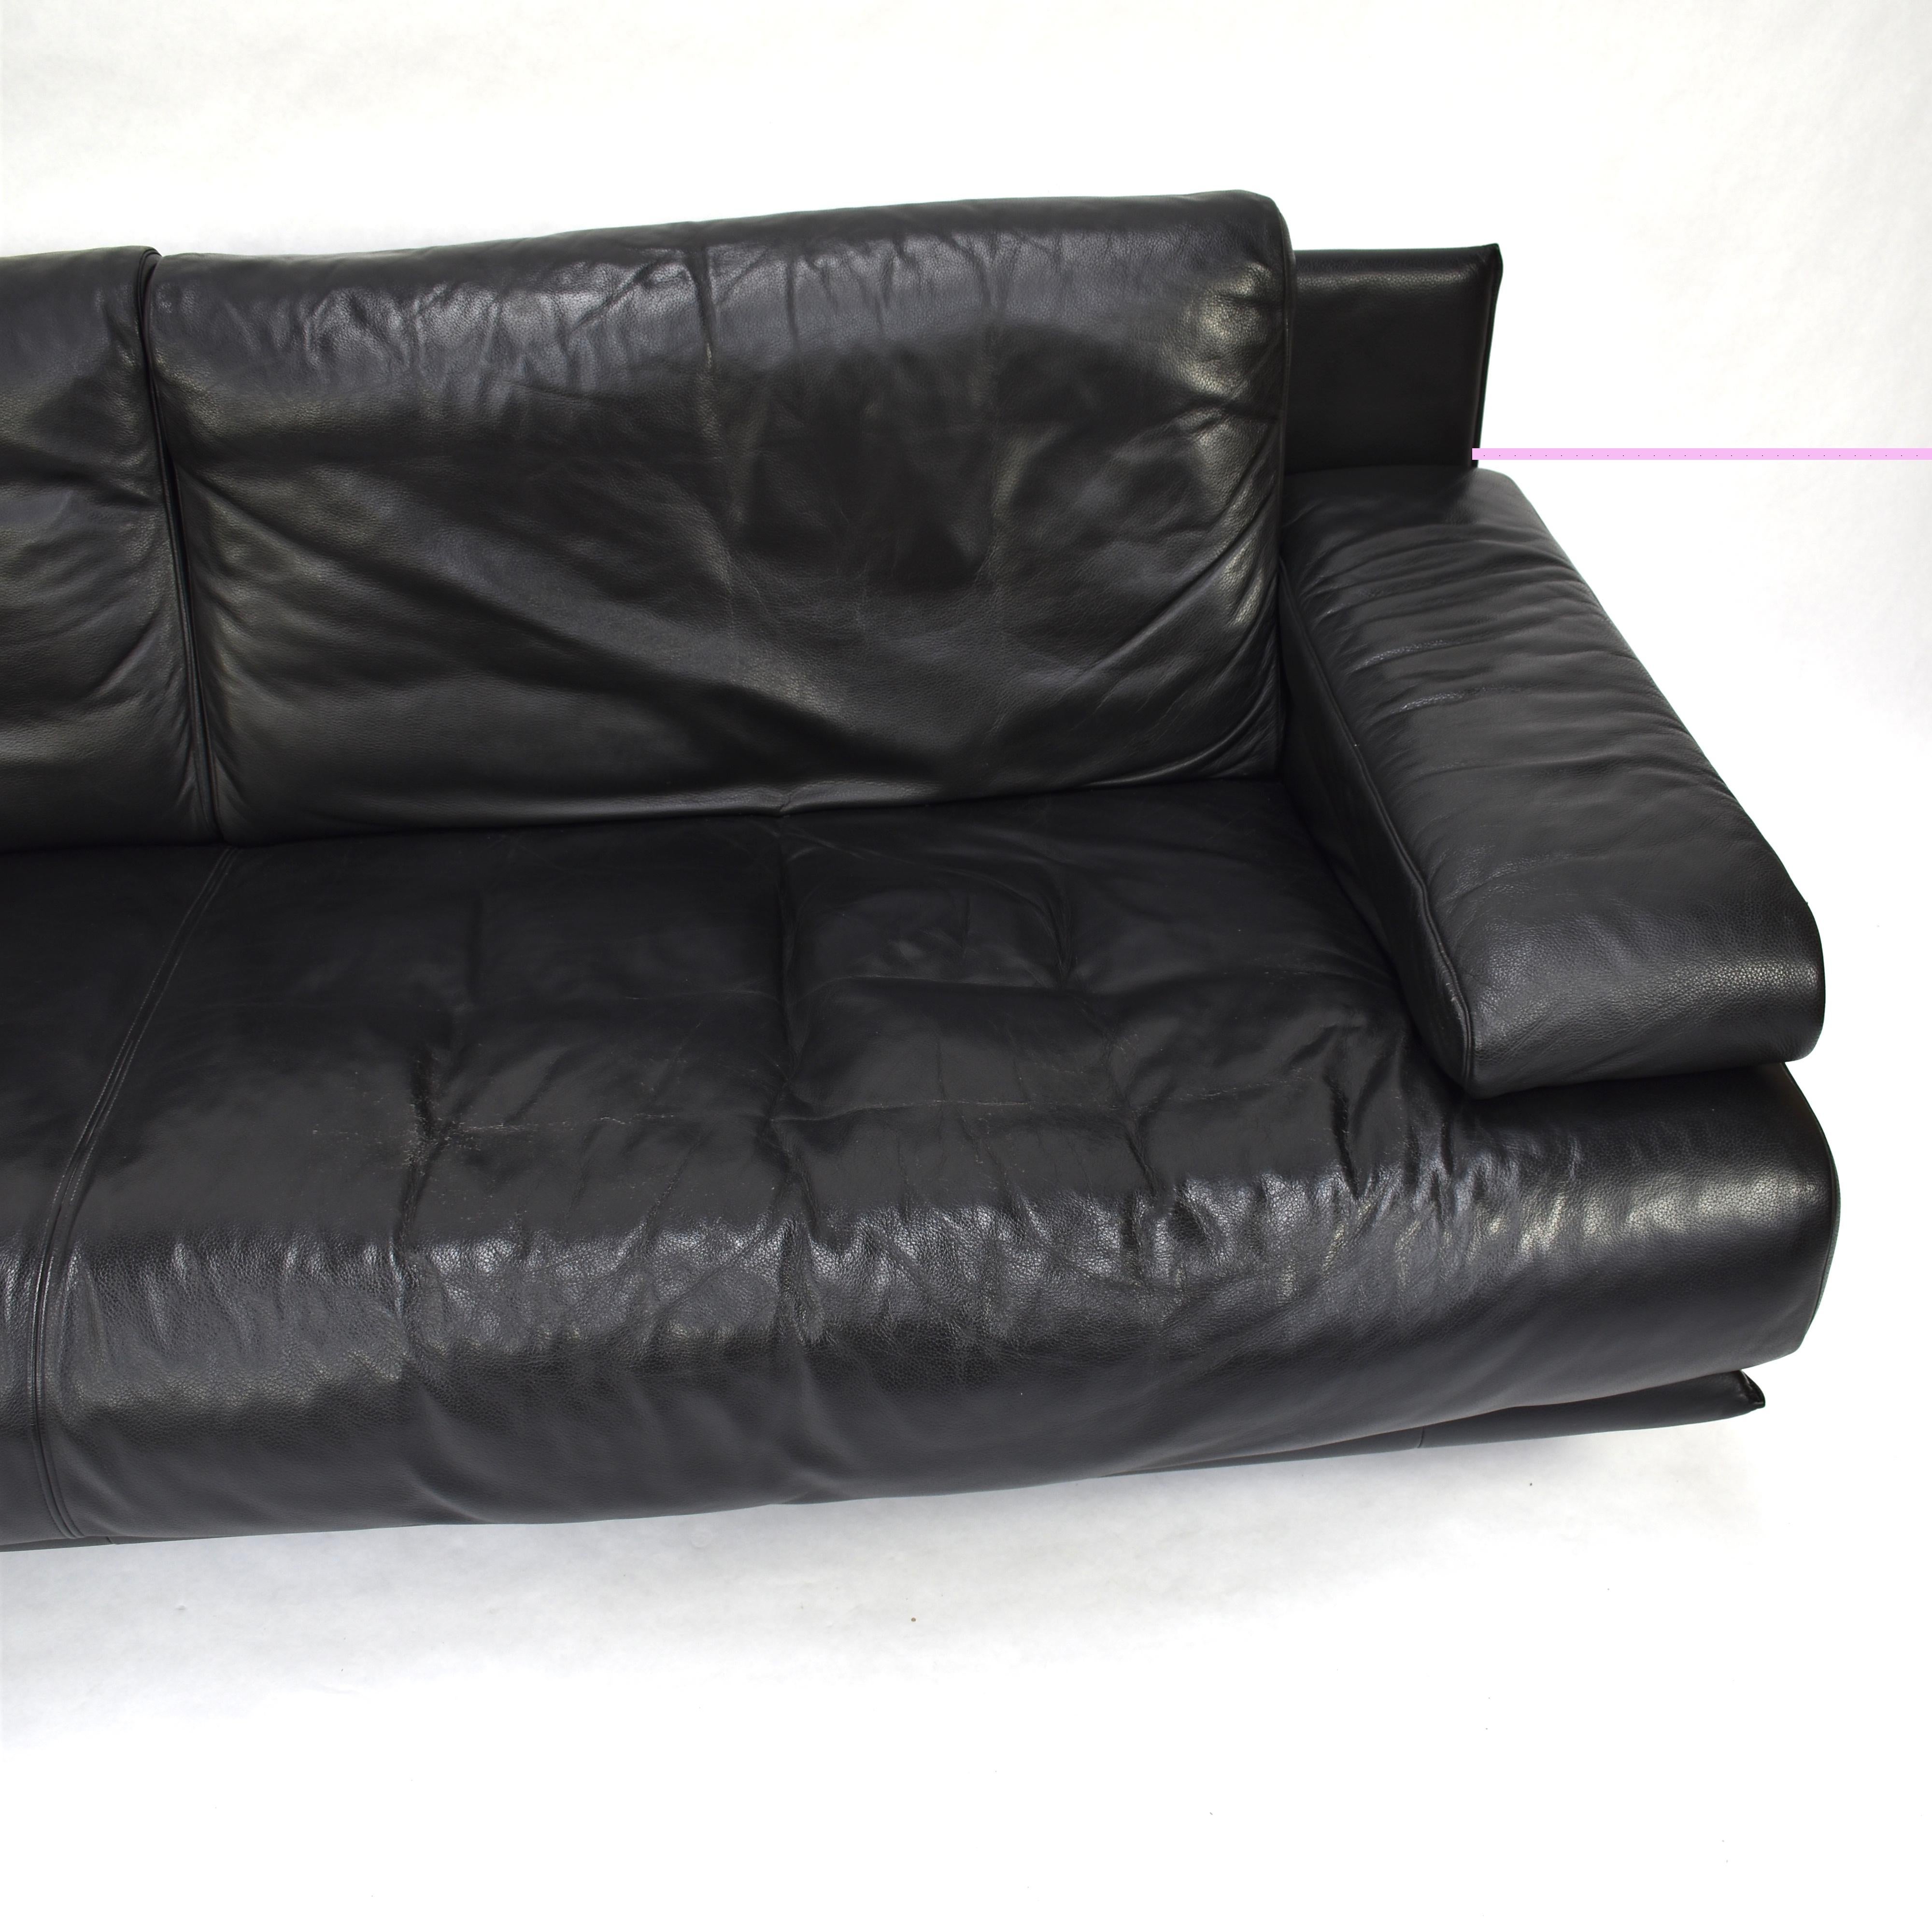 Famous Rolf Benz model 6500 sofa in high quality black leather designed by Mathias Hoffmann. The sofa features extractable backrests and four cushions.

Manufacturer: Rolf Benz

Designer: Mathias Hoffmann

Country: Germany

Model: Sofa with